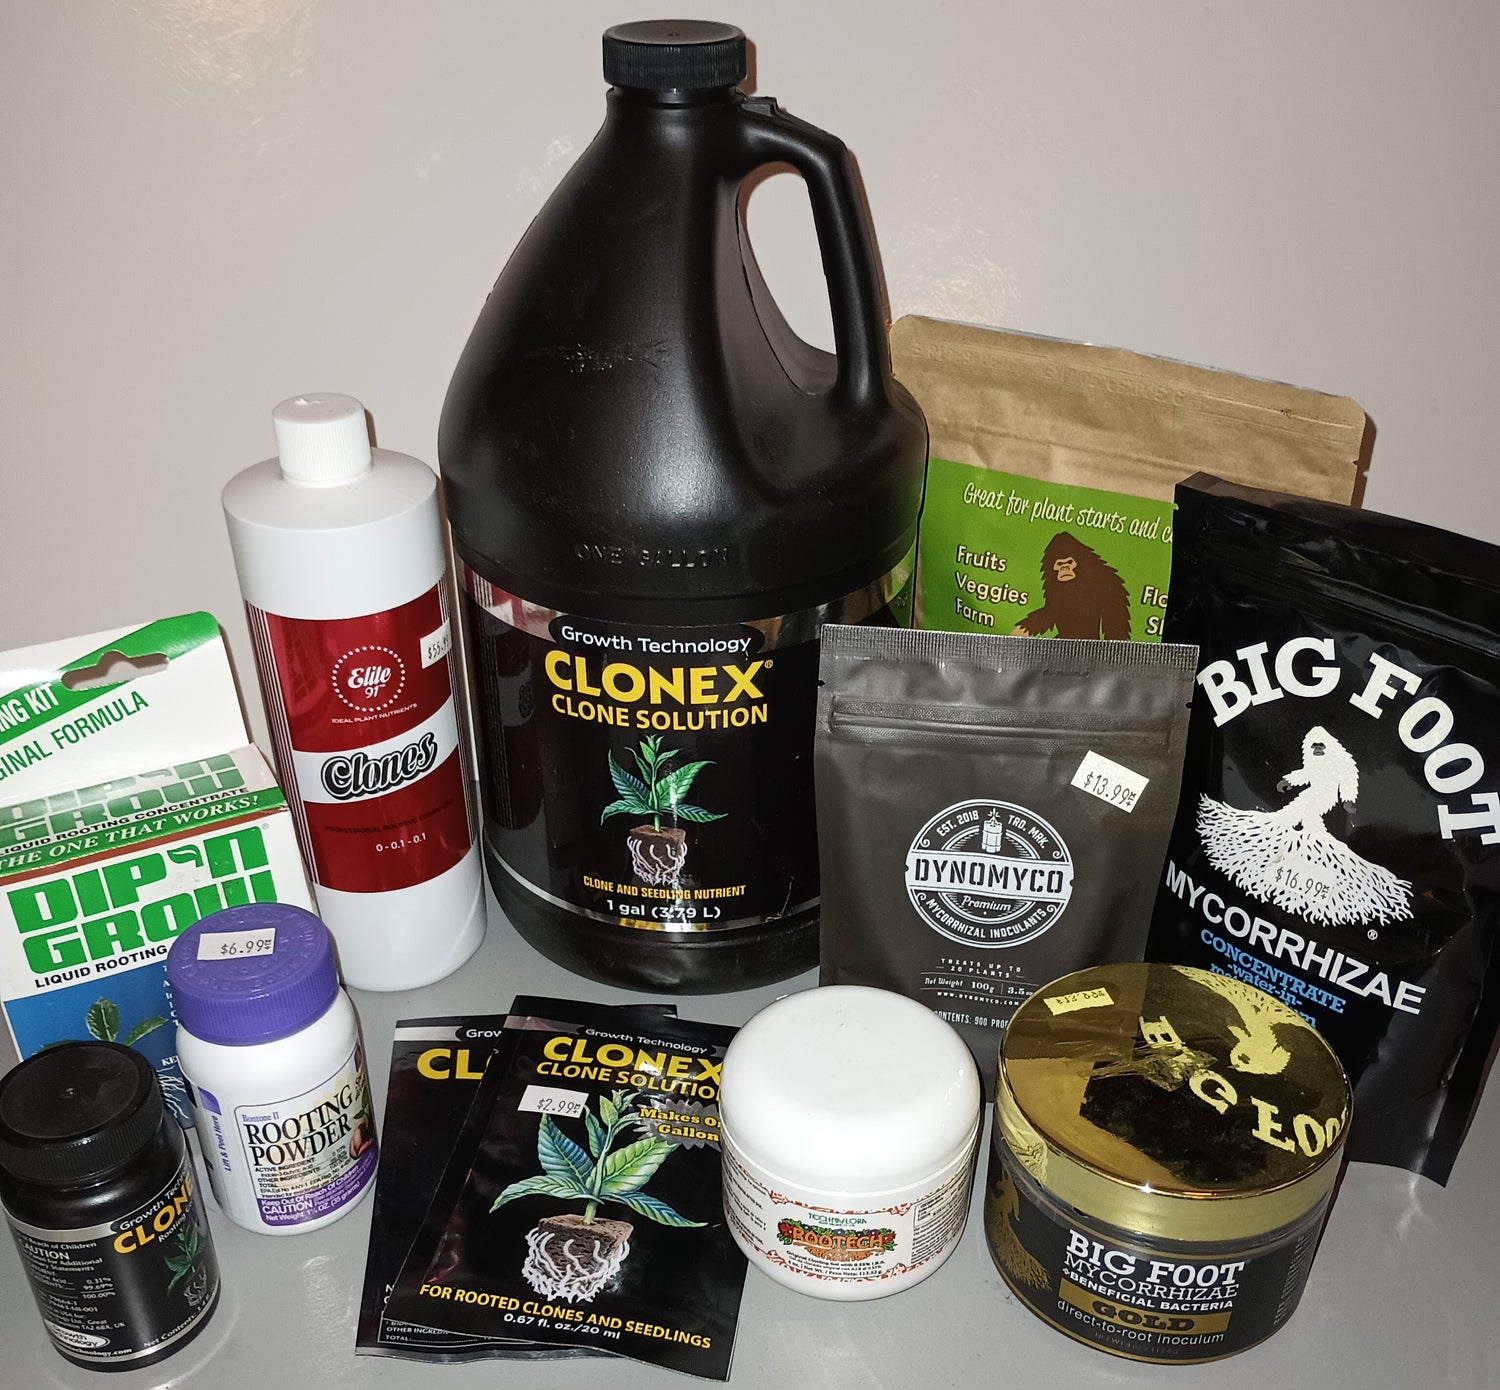 Cloning and Rooting Products